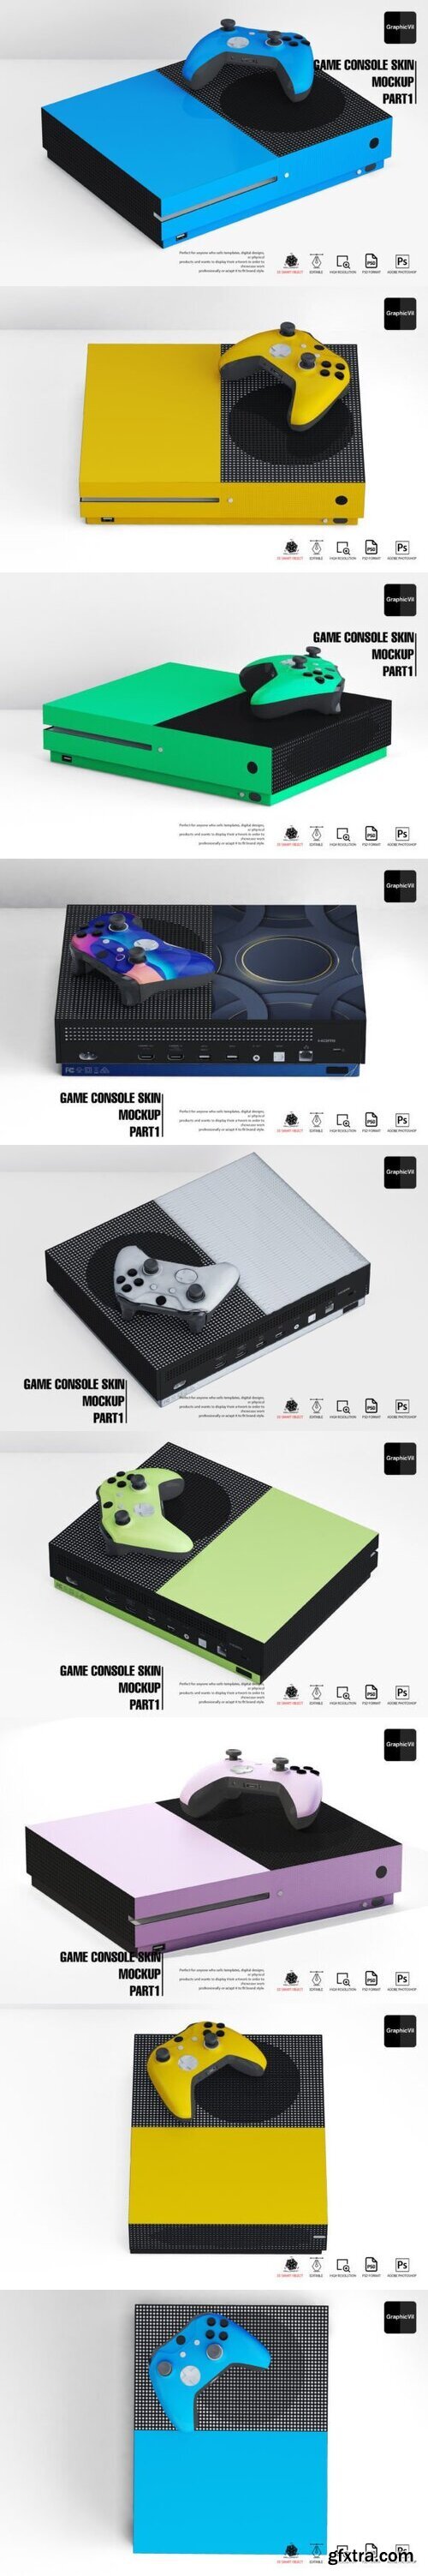 Game Console Skin Mockup Part 1